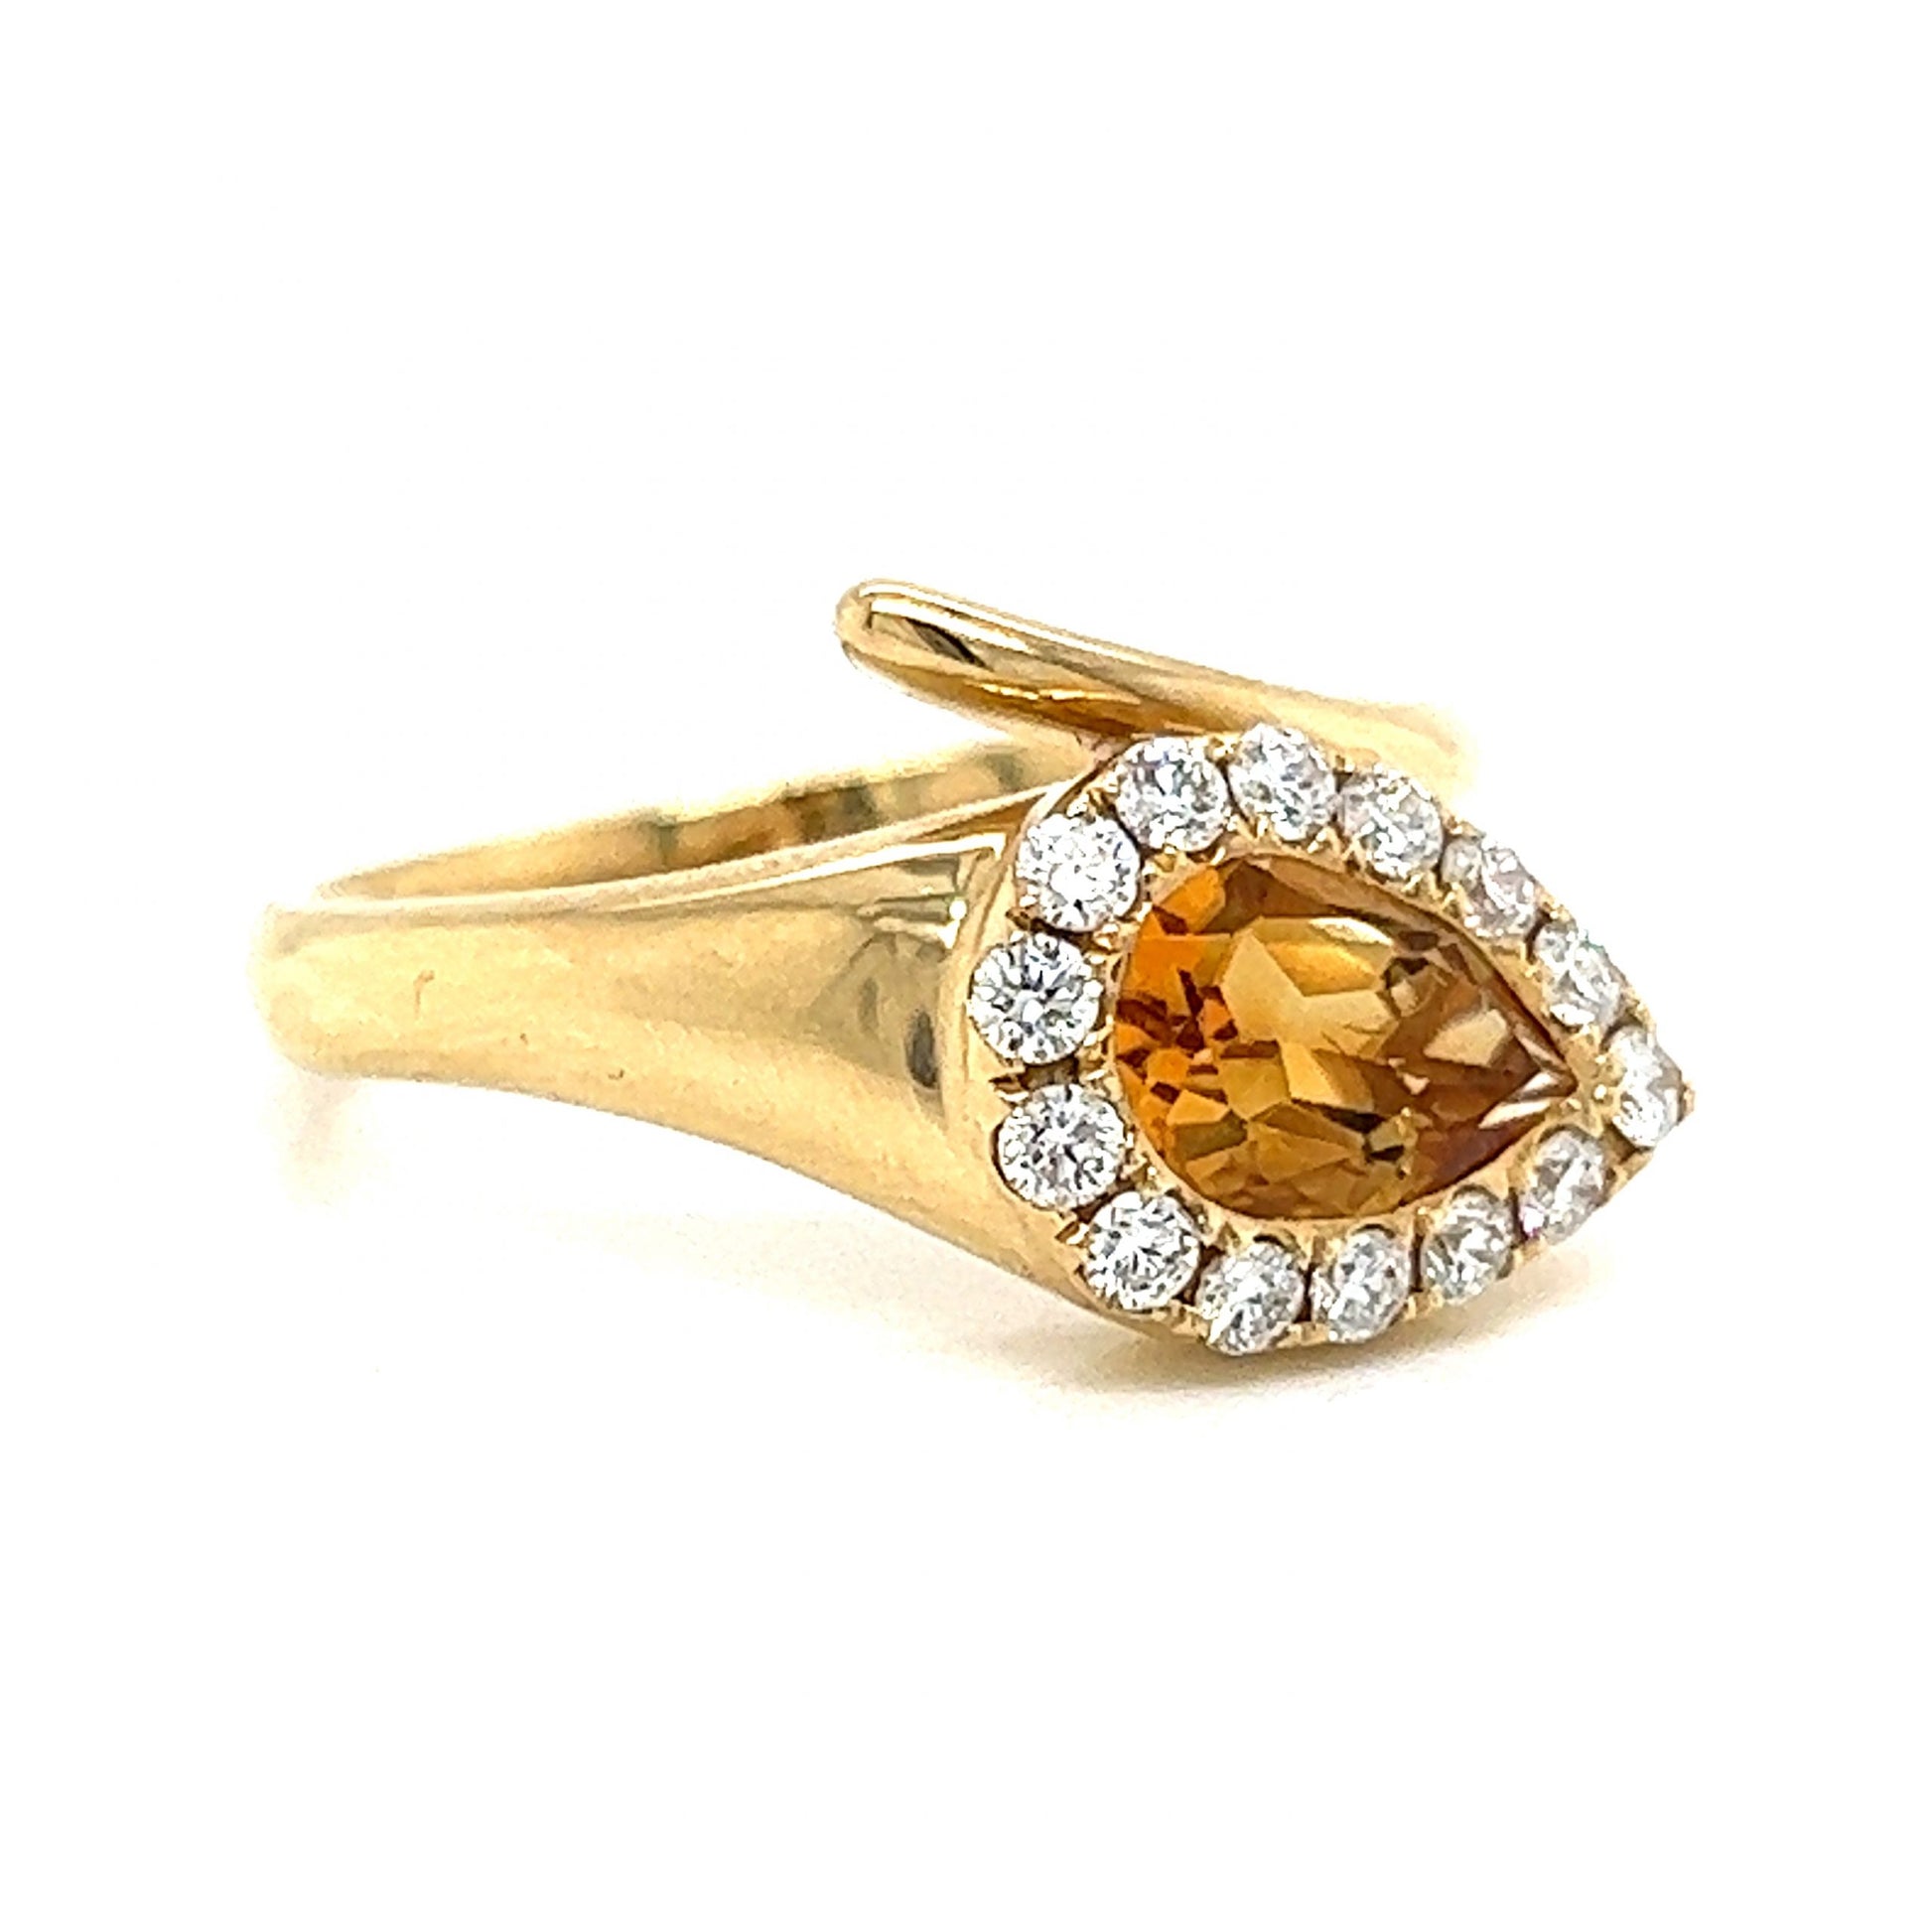 Citrine & Diamond Snake Shaped Ring in 14k Yellow GoldComposition: 14 Karat Yellow Gold Ring Size: 7 Total Diamond Weight: .38ct Total Gram Weight: 4.7 g Inscription: 14KY 129159 D0.38 0.99
      